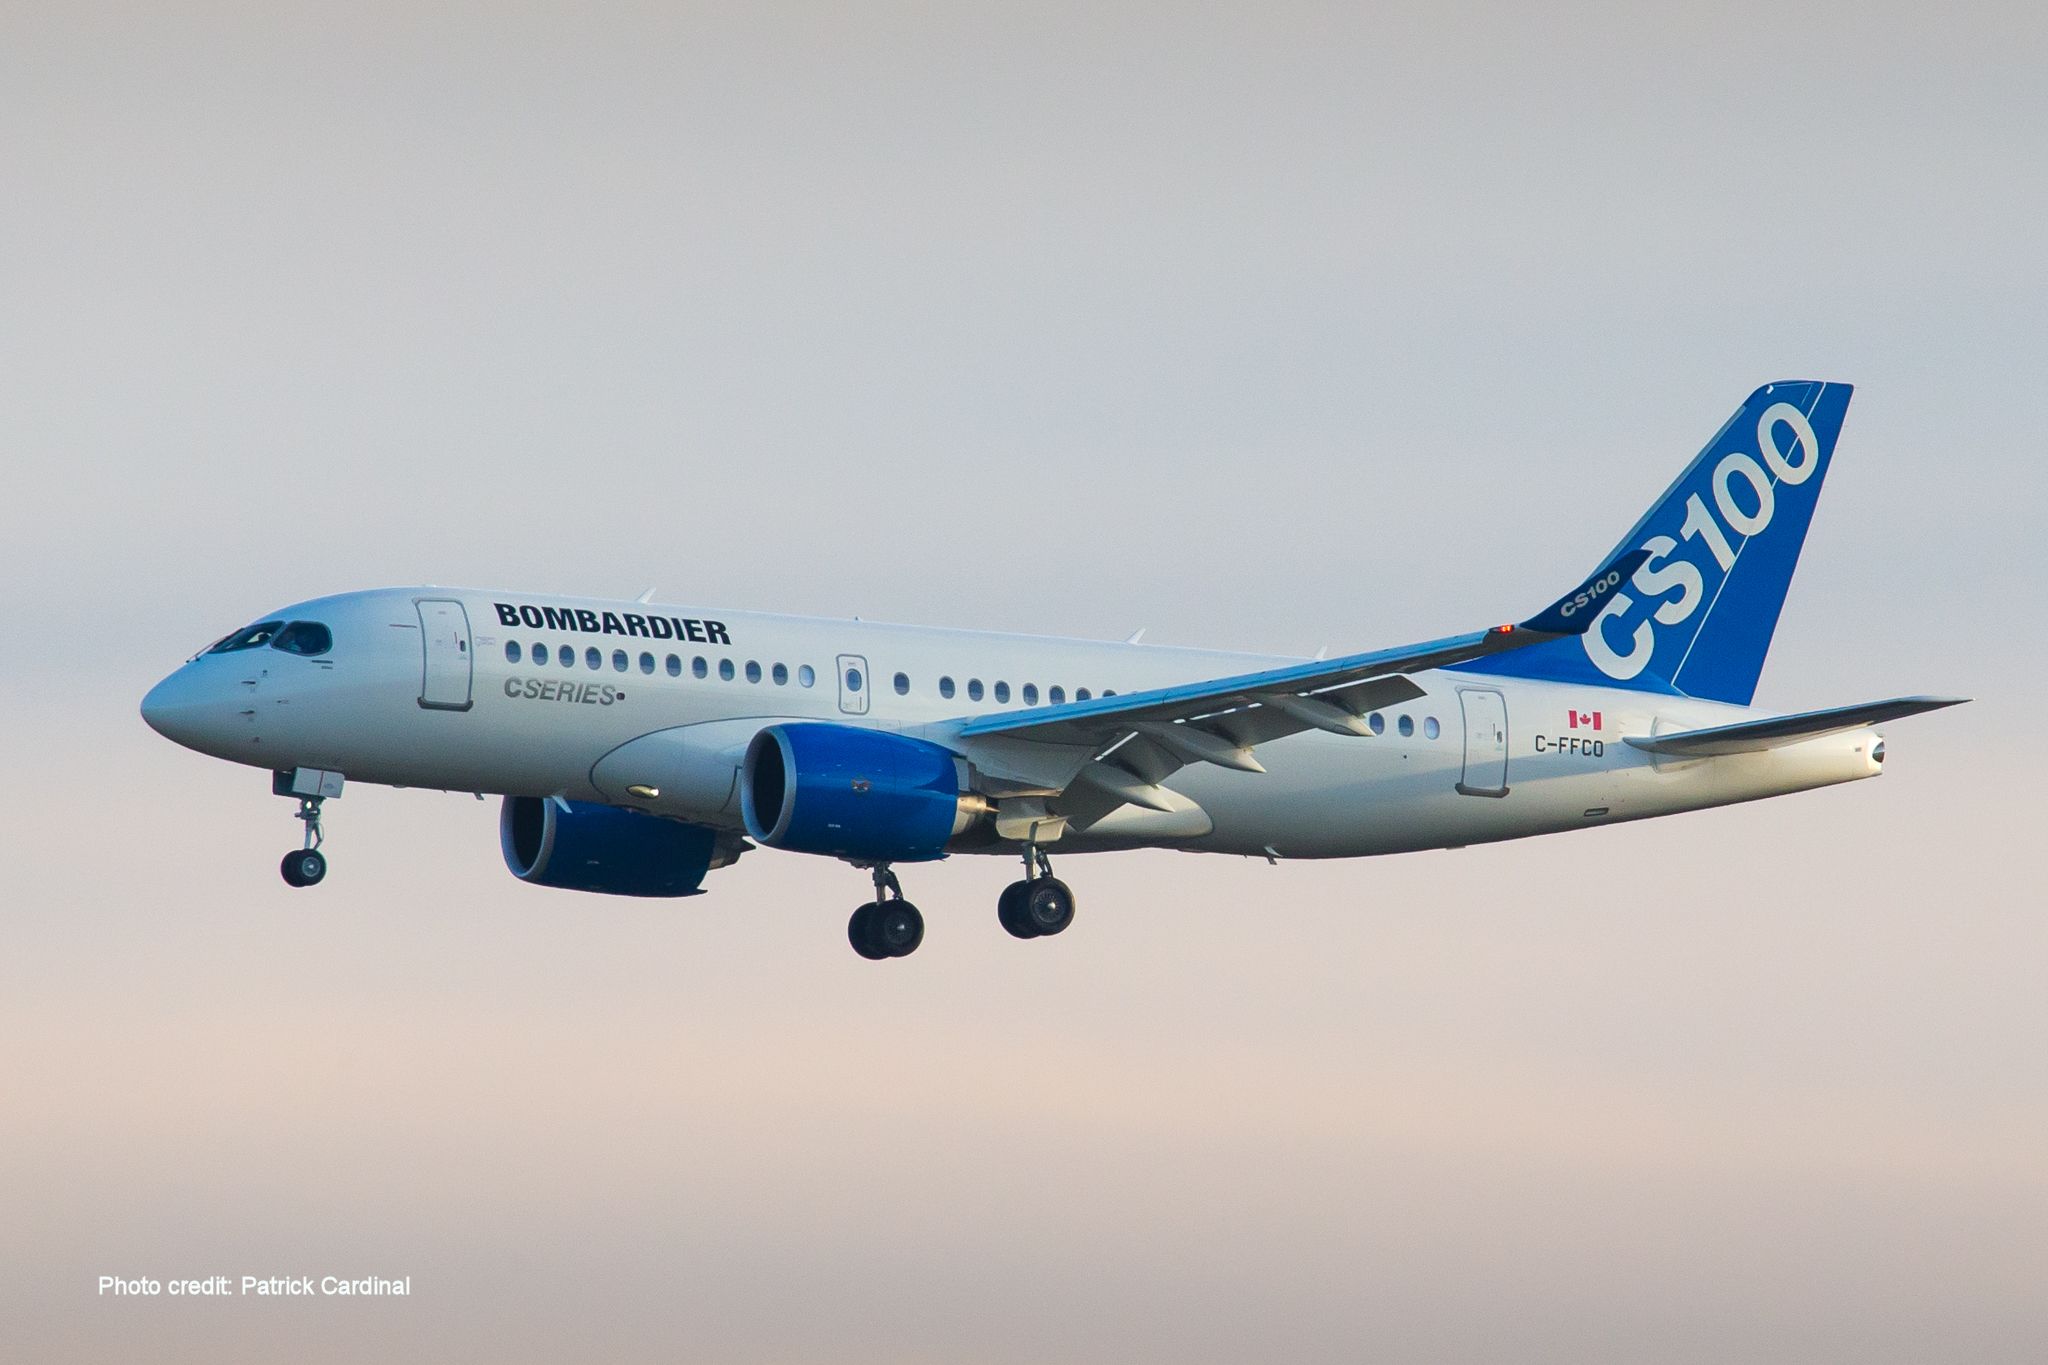 Bombardier s CSeries Completes Flight Certification Testing Economy Class Beyond